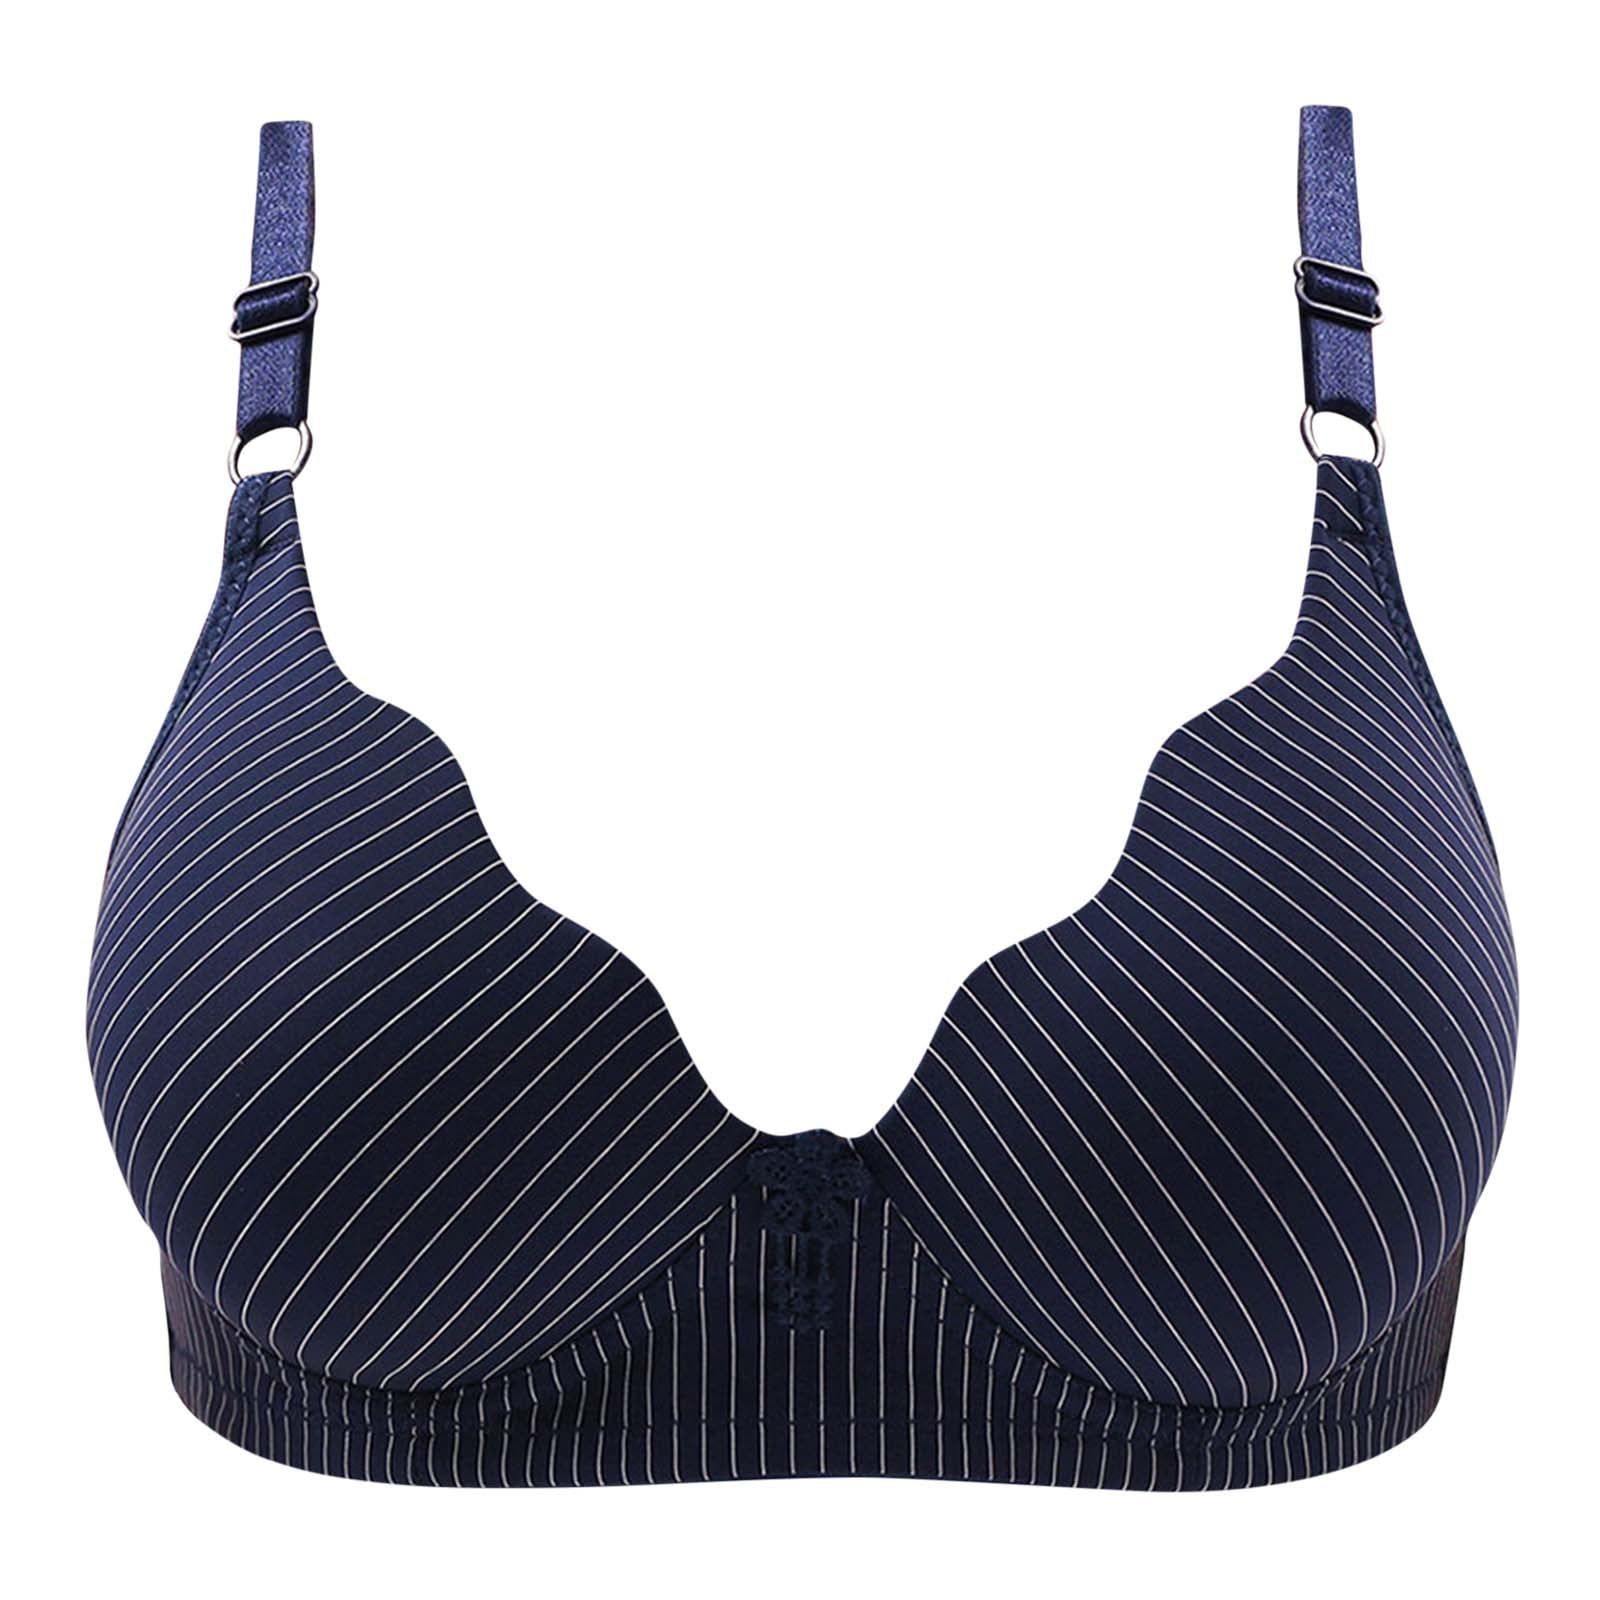  LANREN Women Zipper V-Neck Bras Girls Cup Lingerie Wireless  Underwear Soft Thin Seamless Bra (Color : Blue, Cup Size : One Size) :  Clothing, Shoes & Jewelry